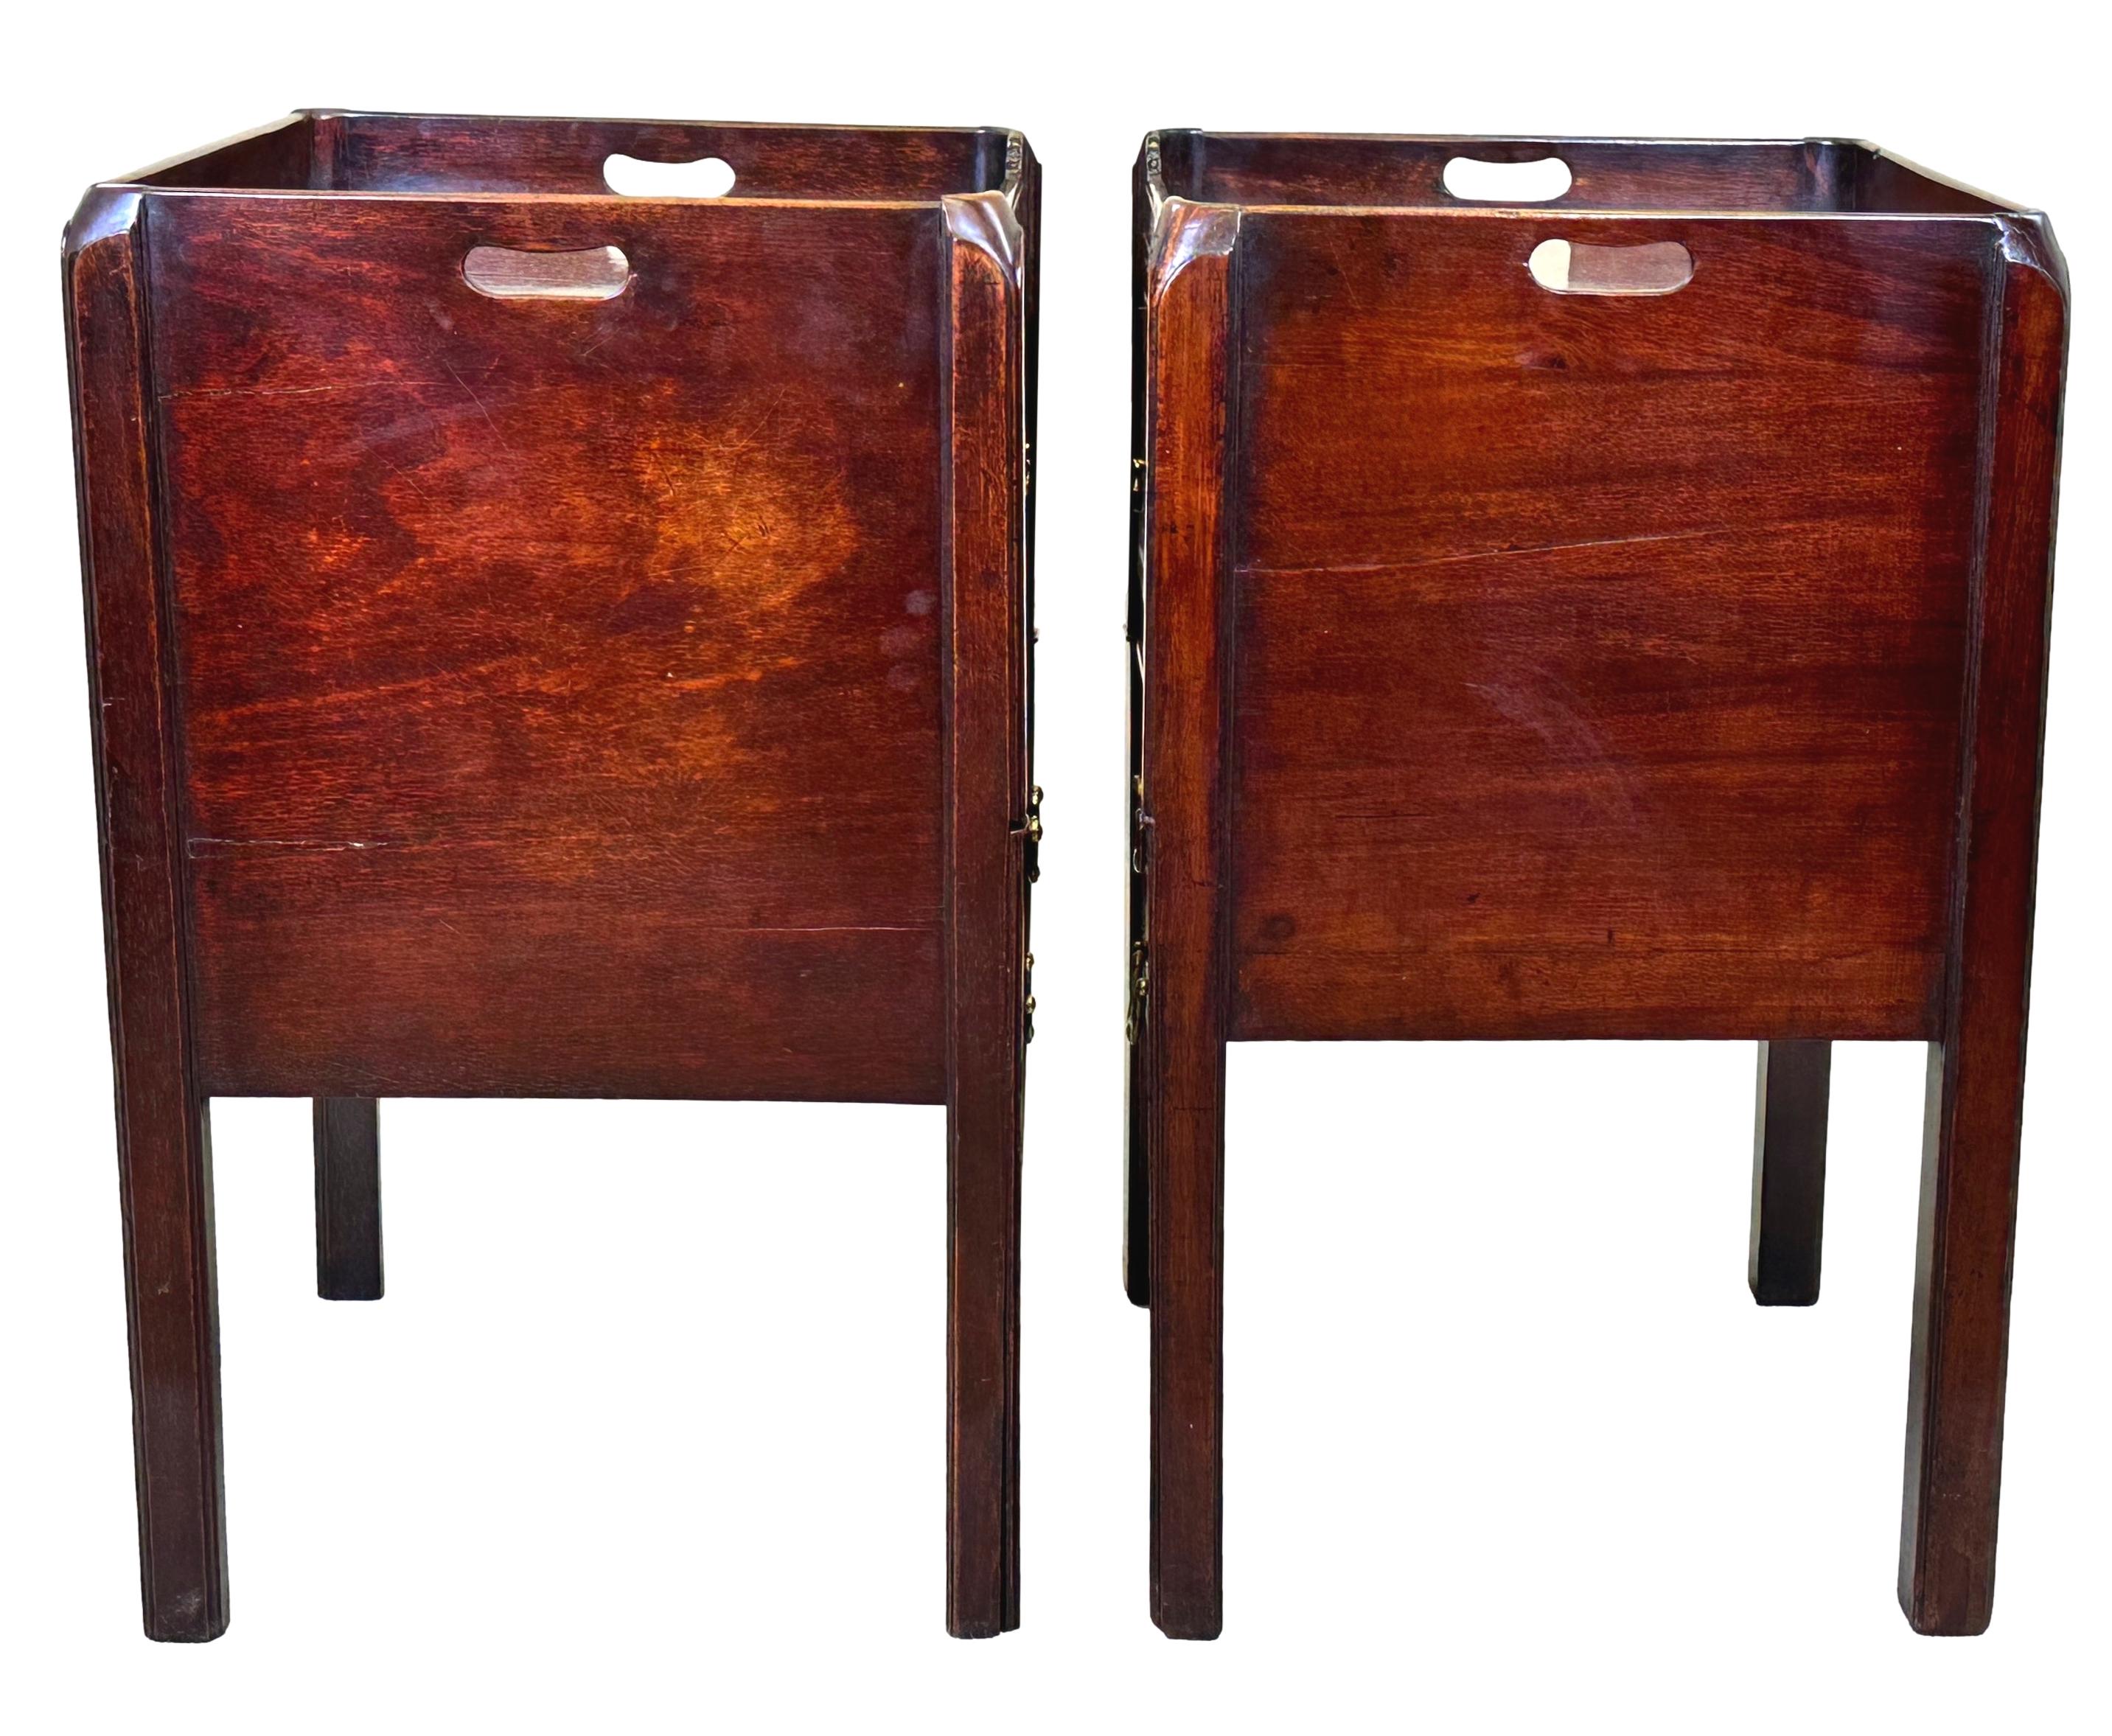 Georgian Mahogany Pair Of Bedside Night Tables In Good Condition For Sale In Bedfordshire, GB